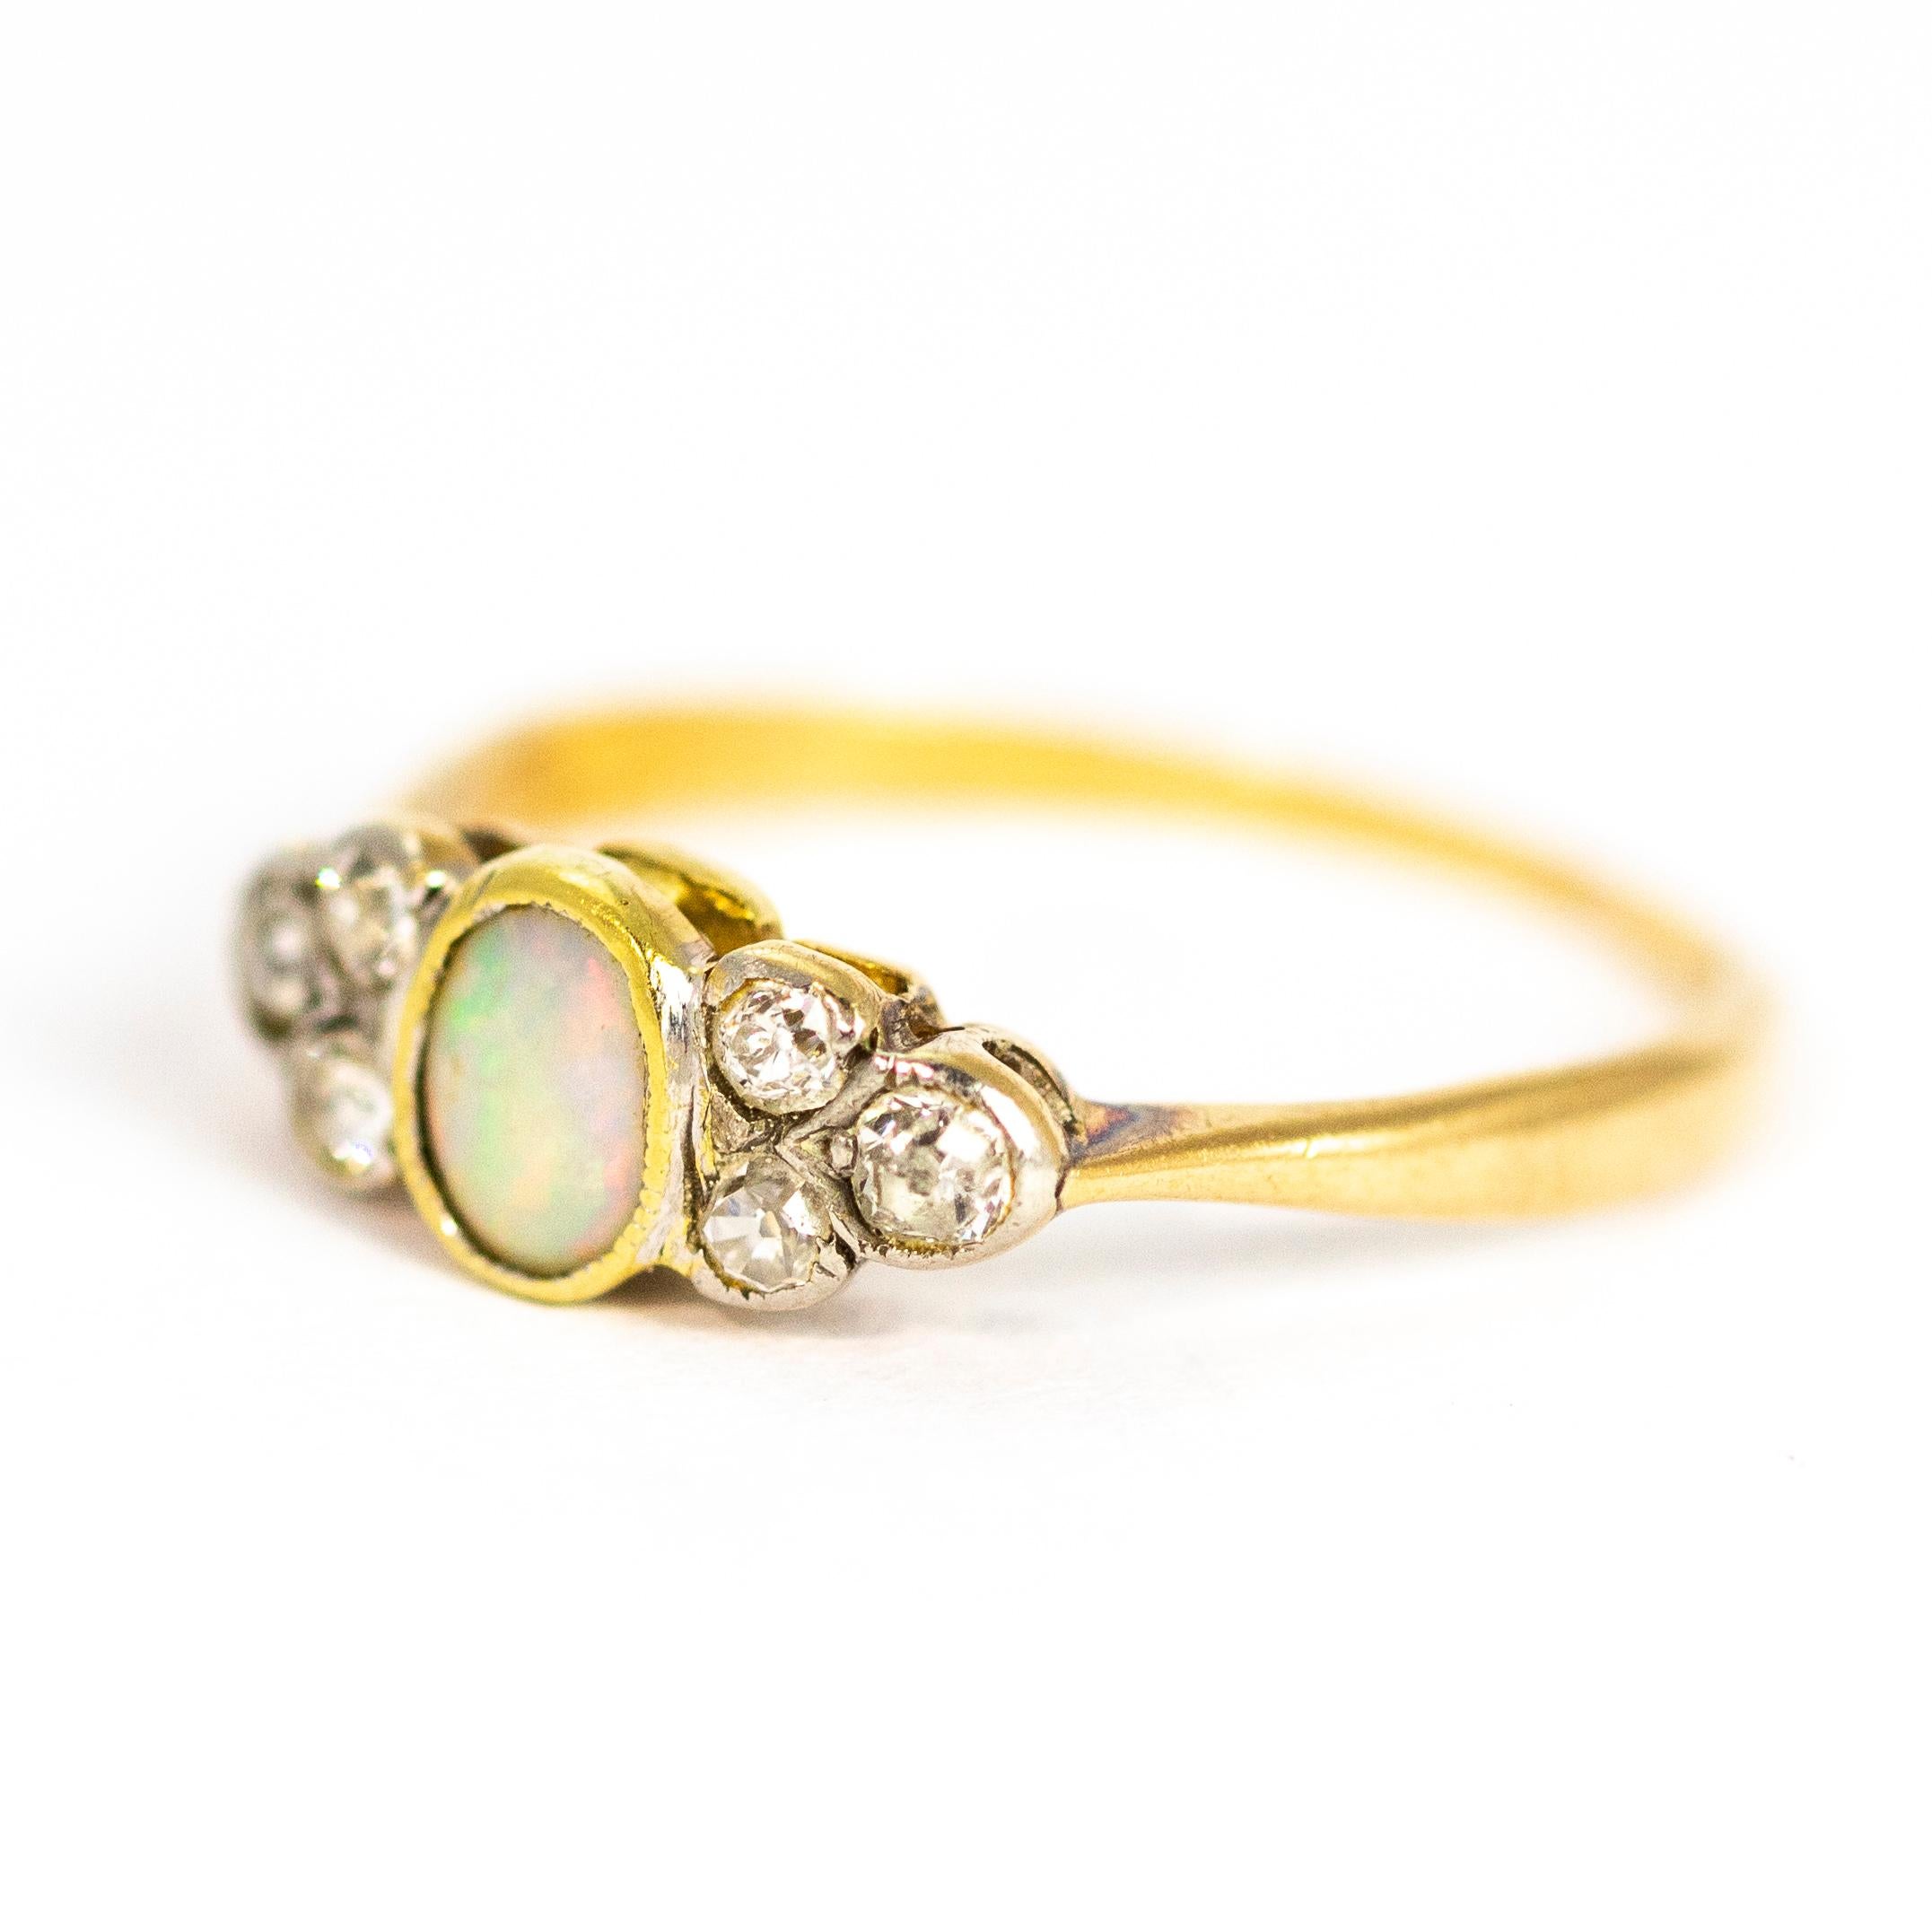 This beautiful and delicate opal ring also boasts six diamonds. The oval shaped opal is sandwiched between a cluster of three diamonds each side. Modelled out of 18ct gold.

Ring Size: L 1/2 or 6
Opal Dimensions: 4.5mm x 5mm